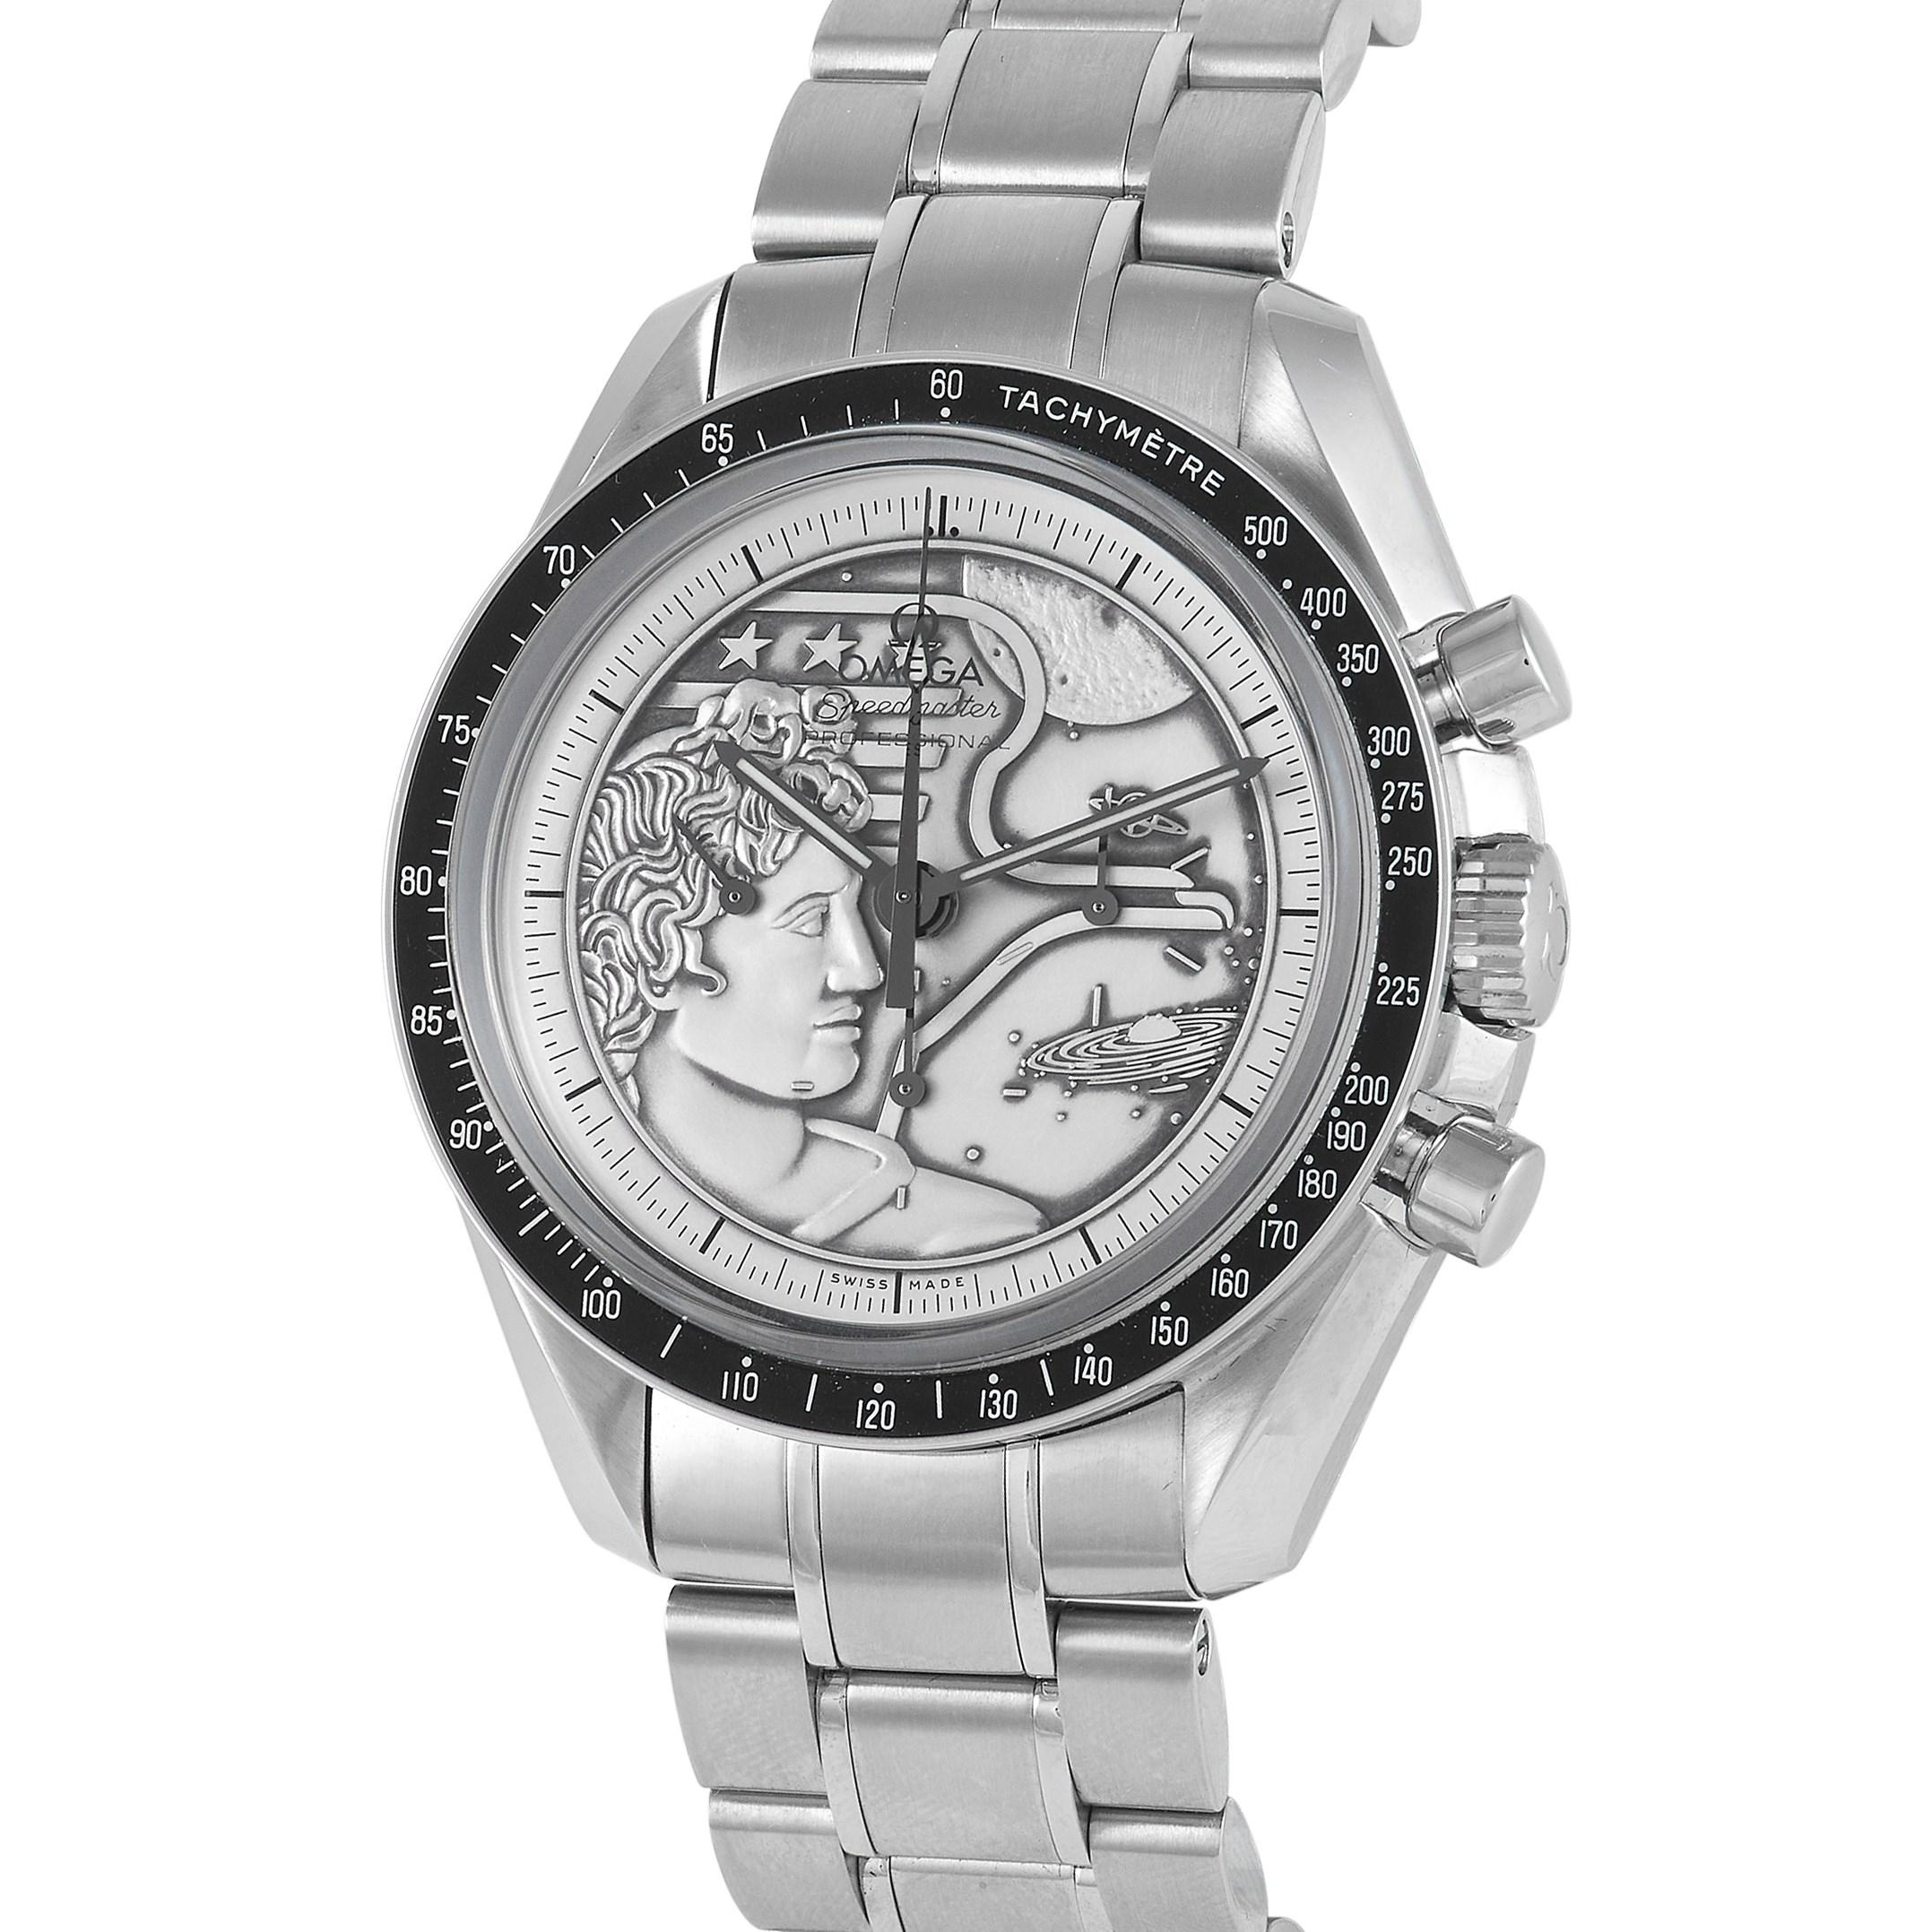 In honor of the 40th anniversary of Apollo XVII, OMEGA released this exceptional Moonwatch with a stainless steel bracelet and a silver dial embossed with the Apollo XVII patch. It is not just a timekeeper but also a conversation starter. This